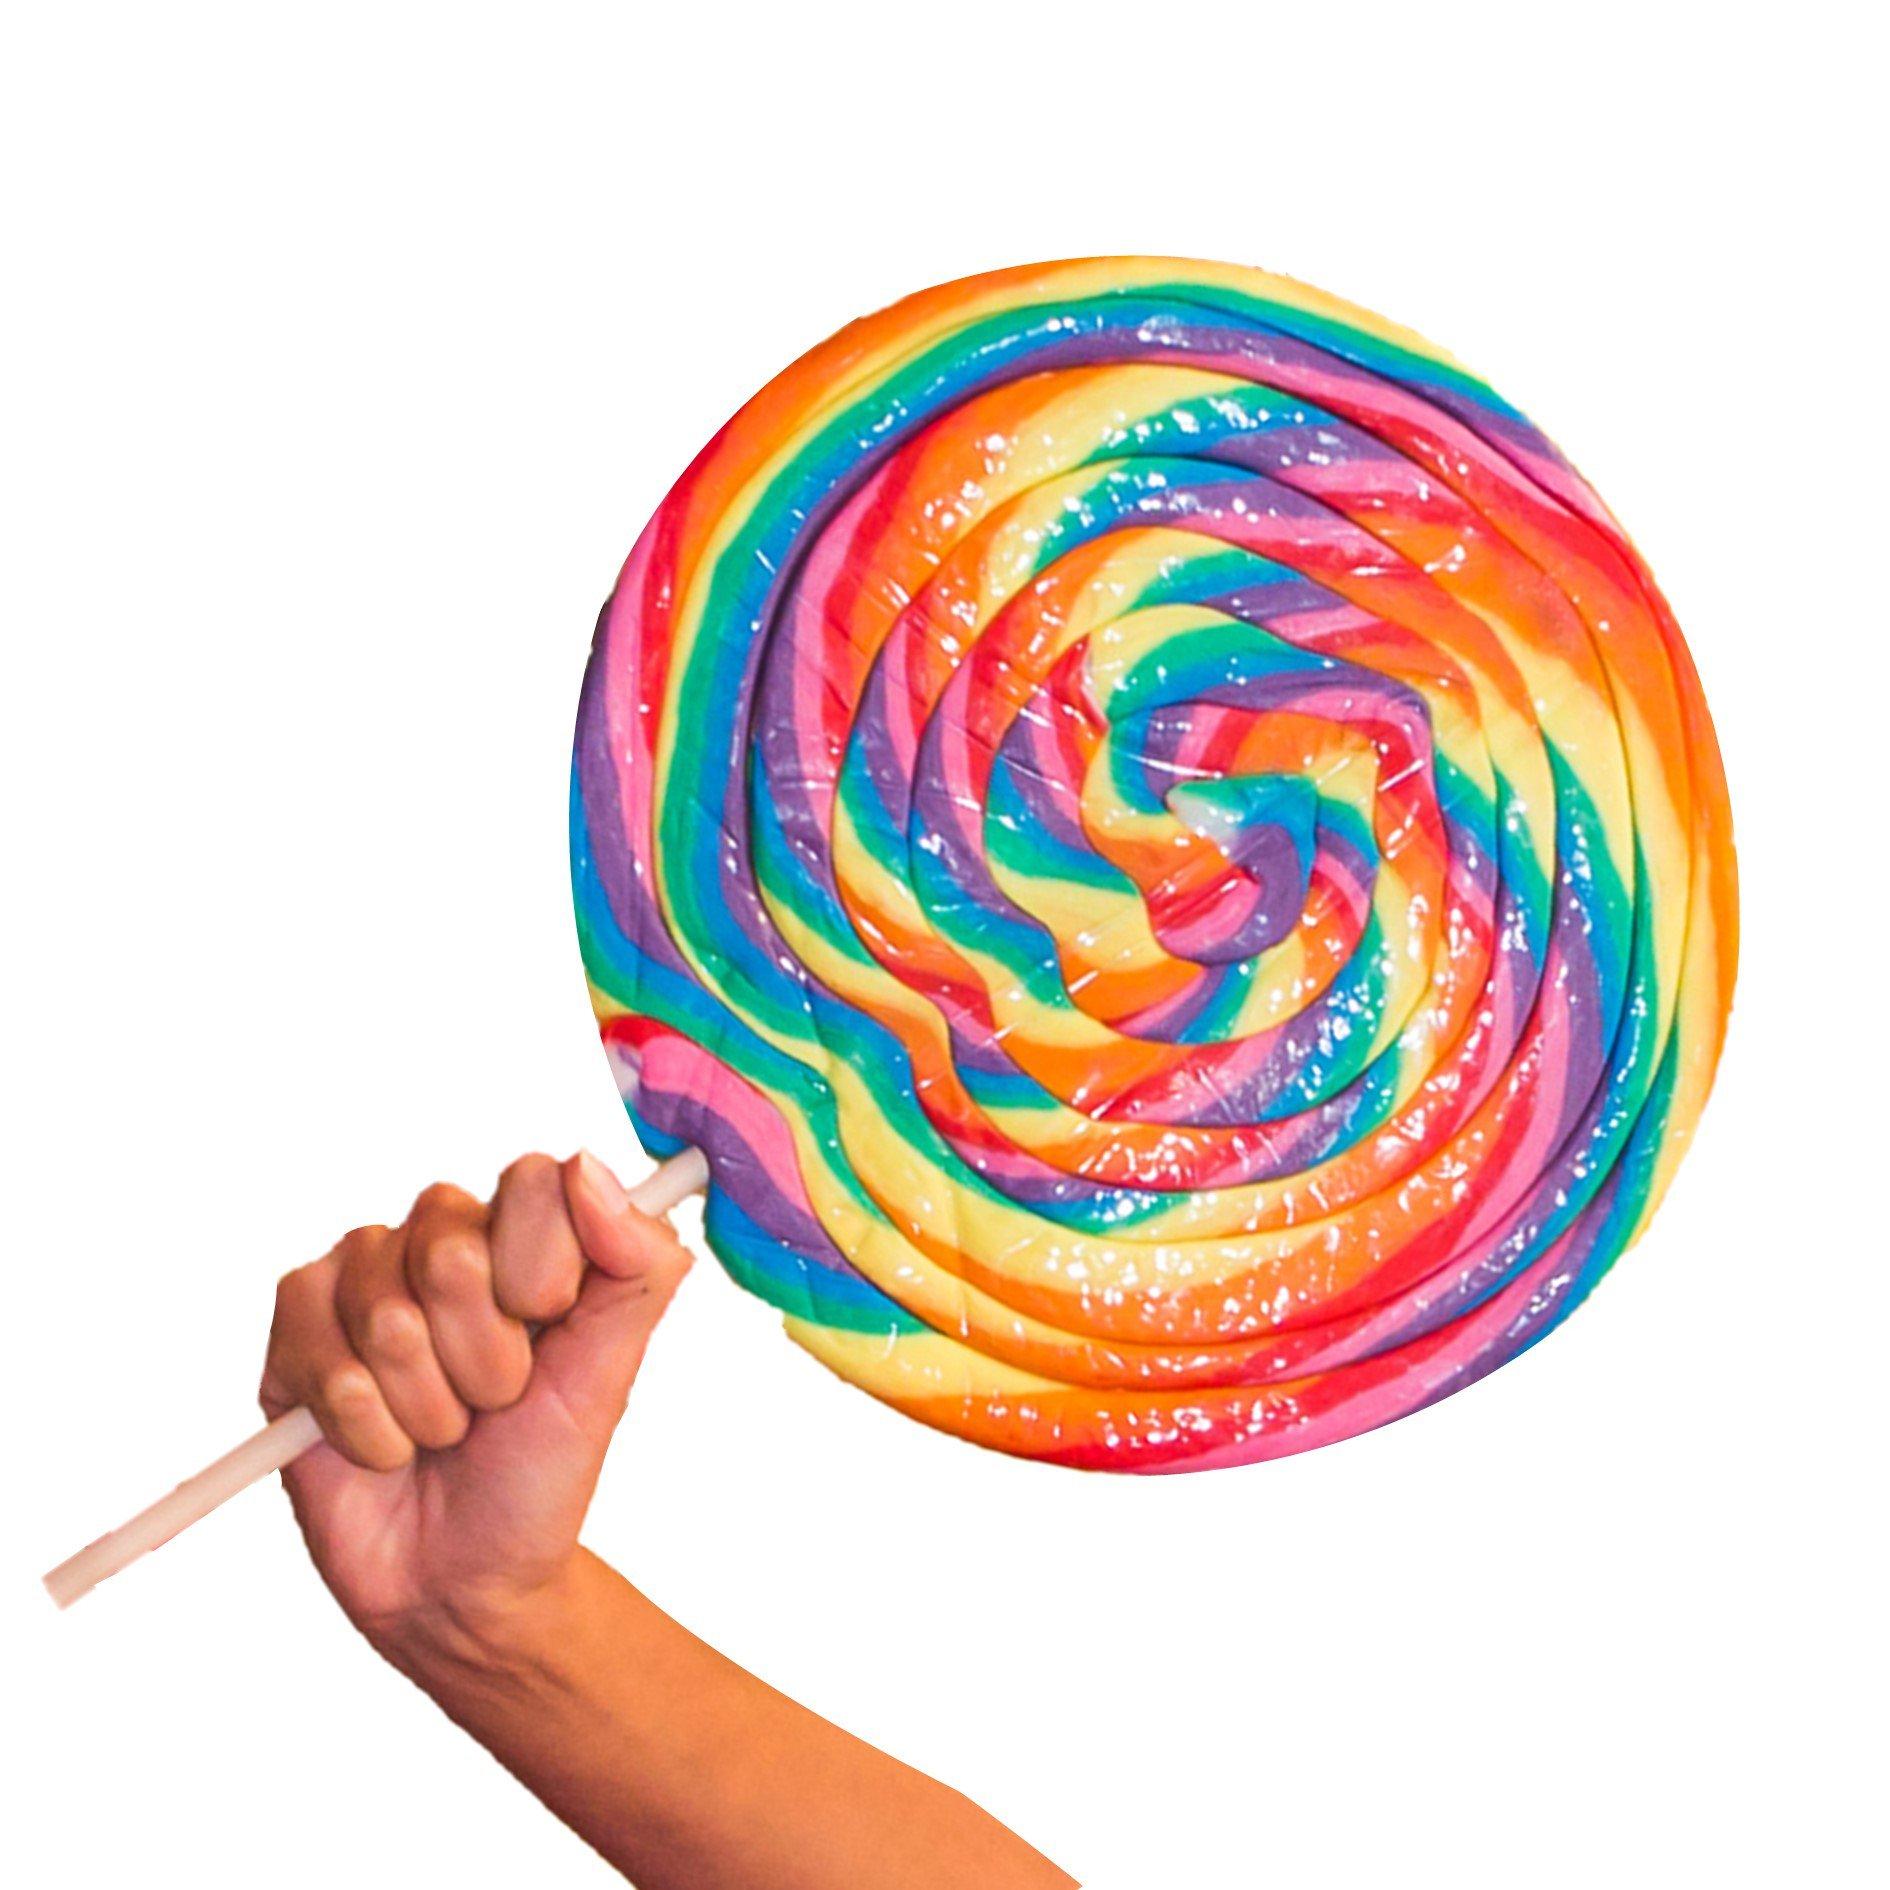 What is lolly porn